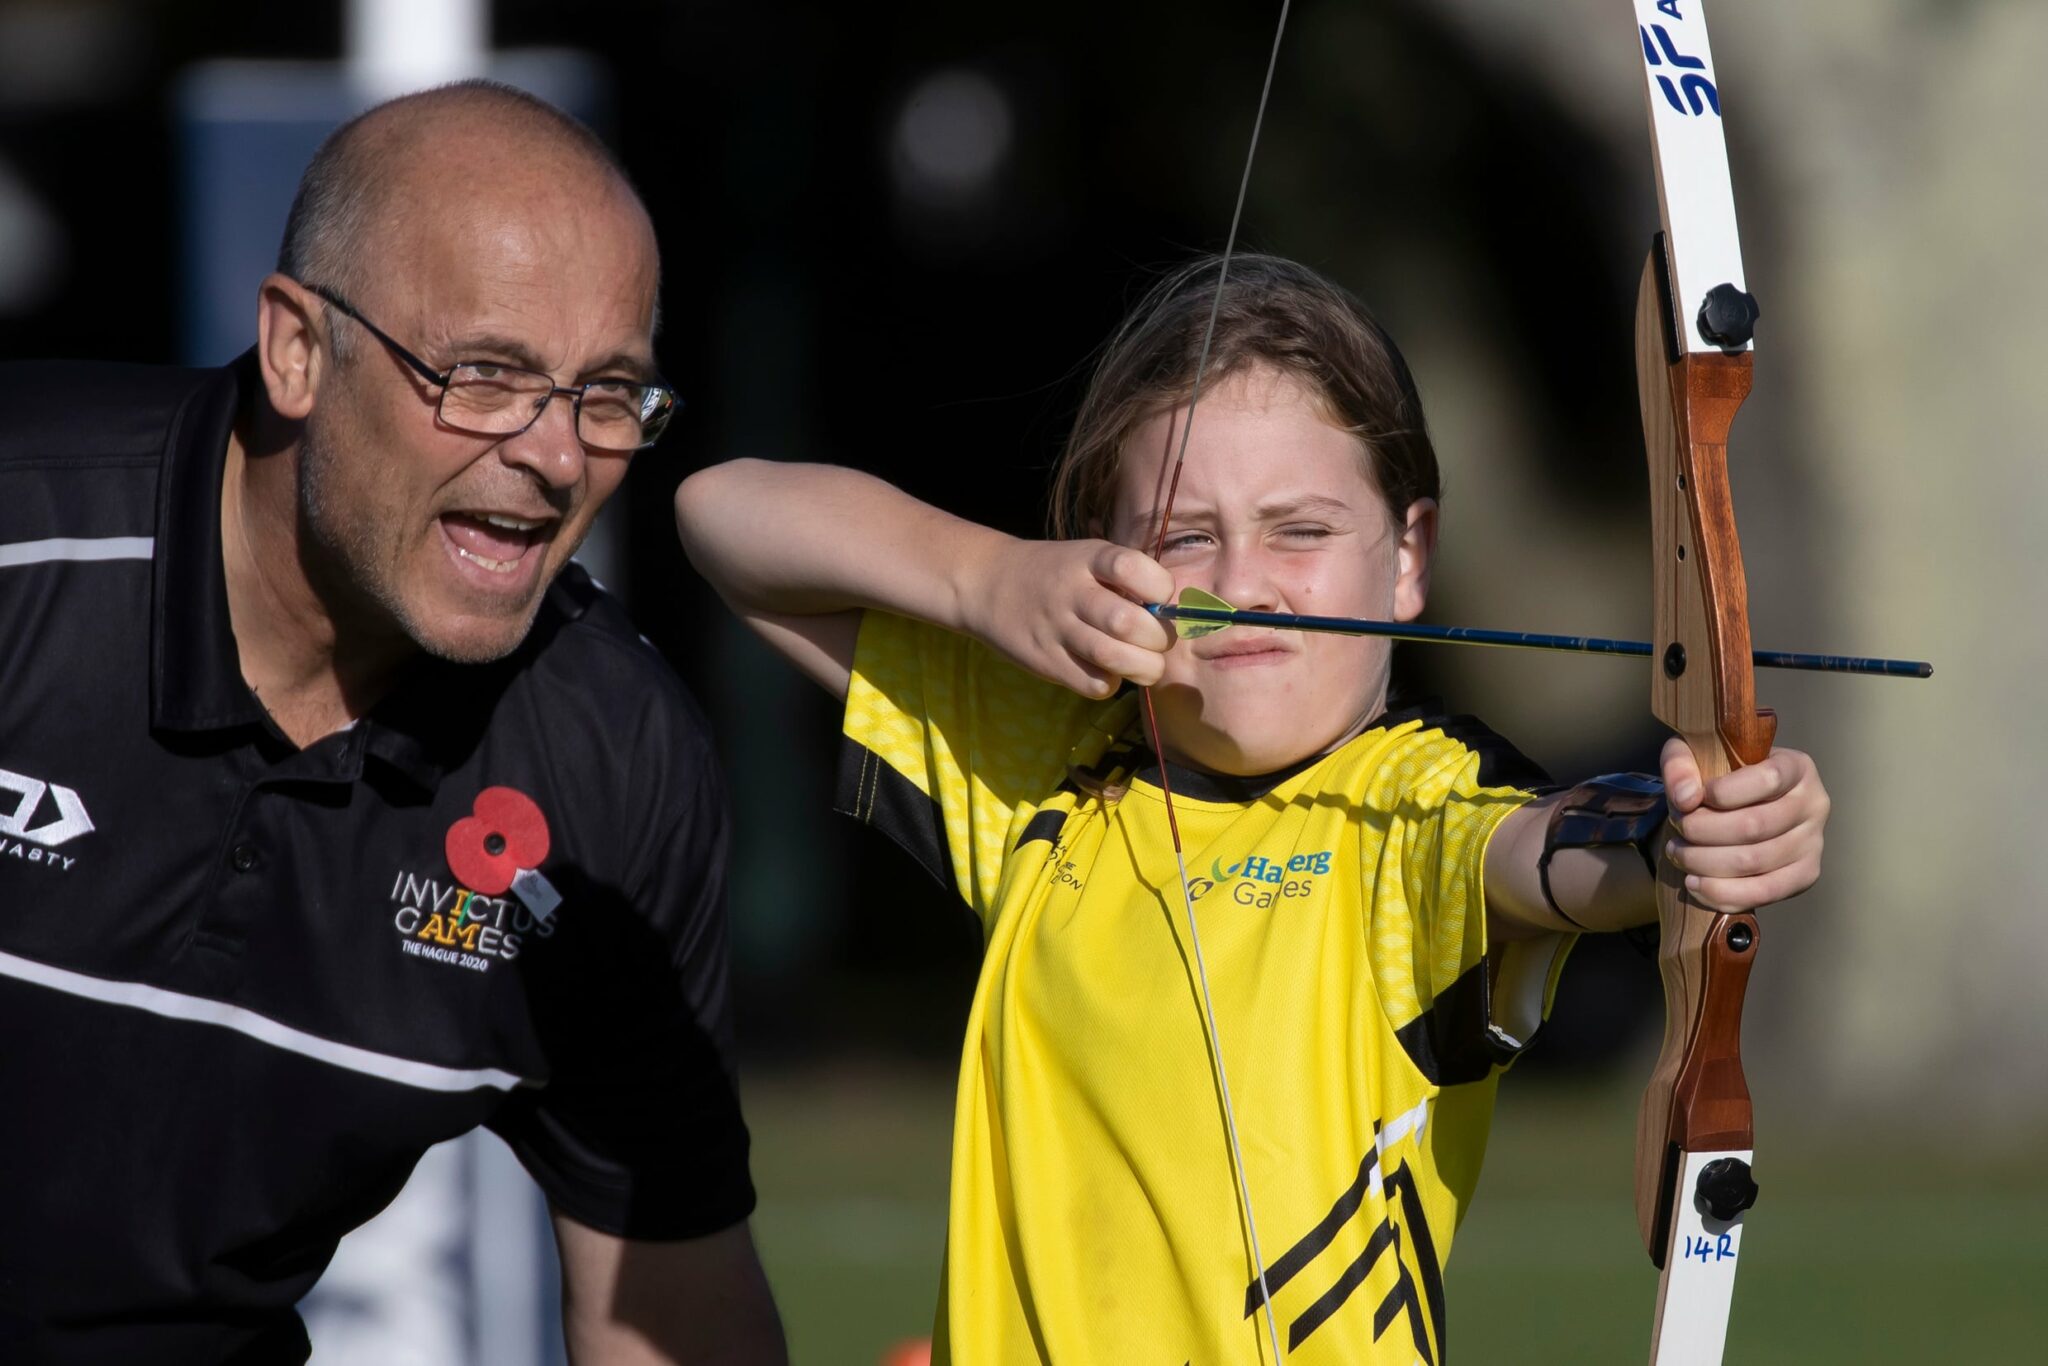 Young girl in bright yellow t-shirt shoots bow and arrow